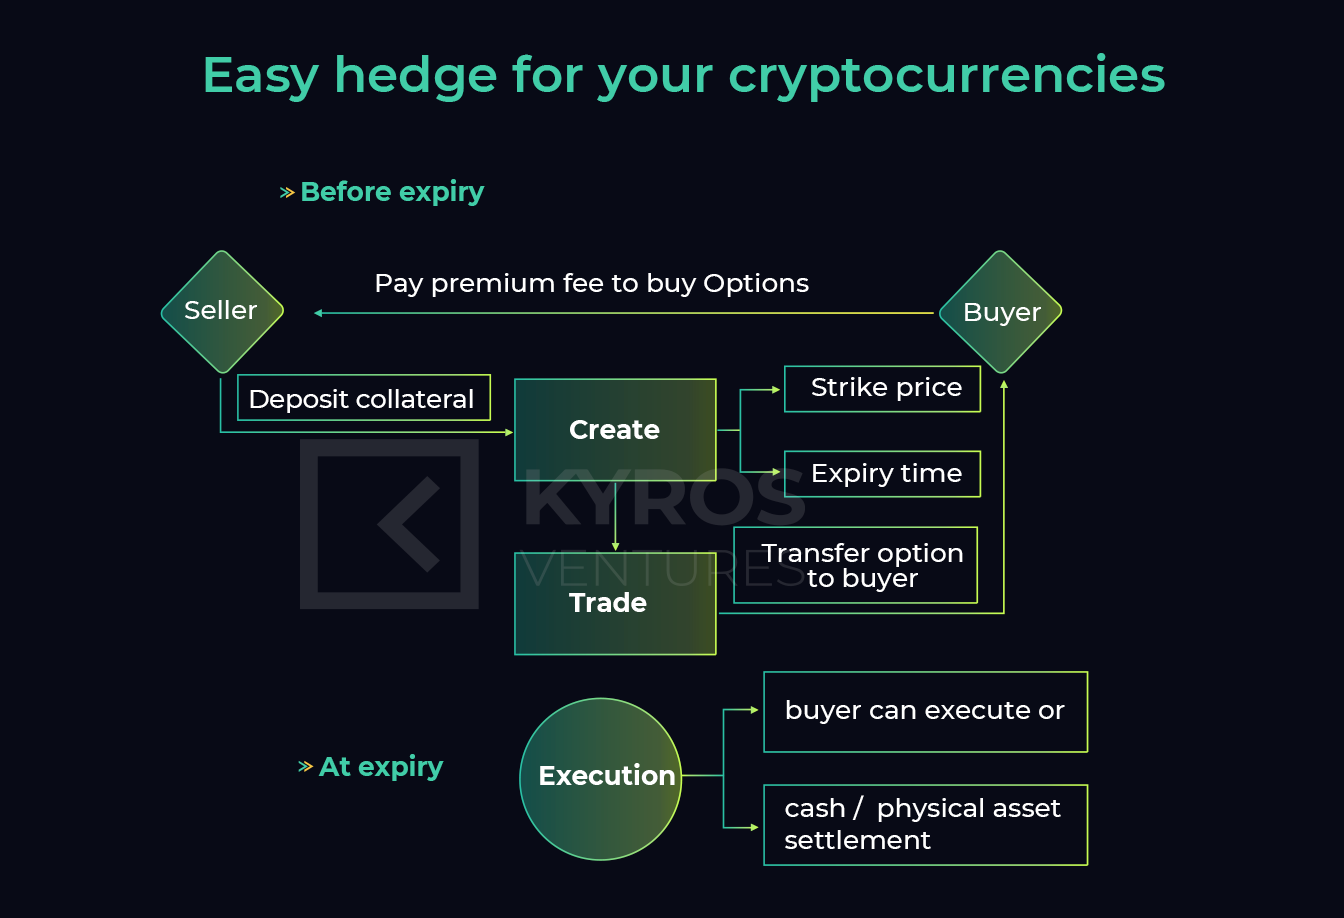 Introducing The Hedget Protocol - Building A Decentralized Options Trading Platform